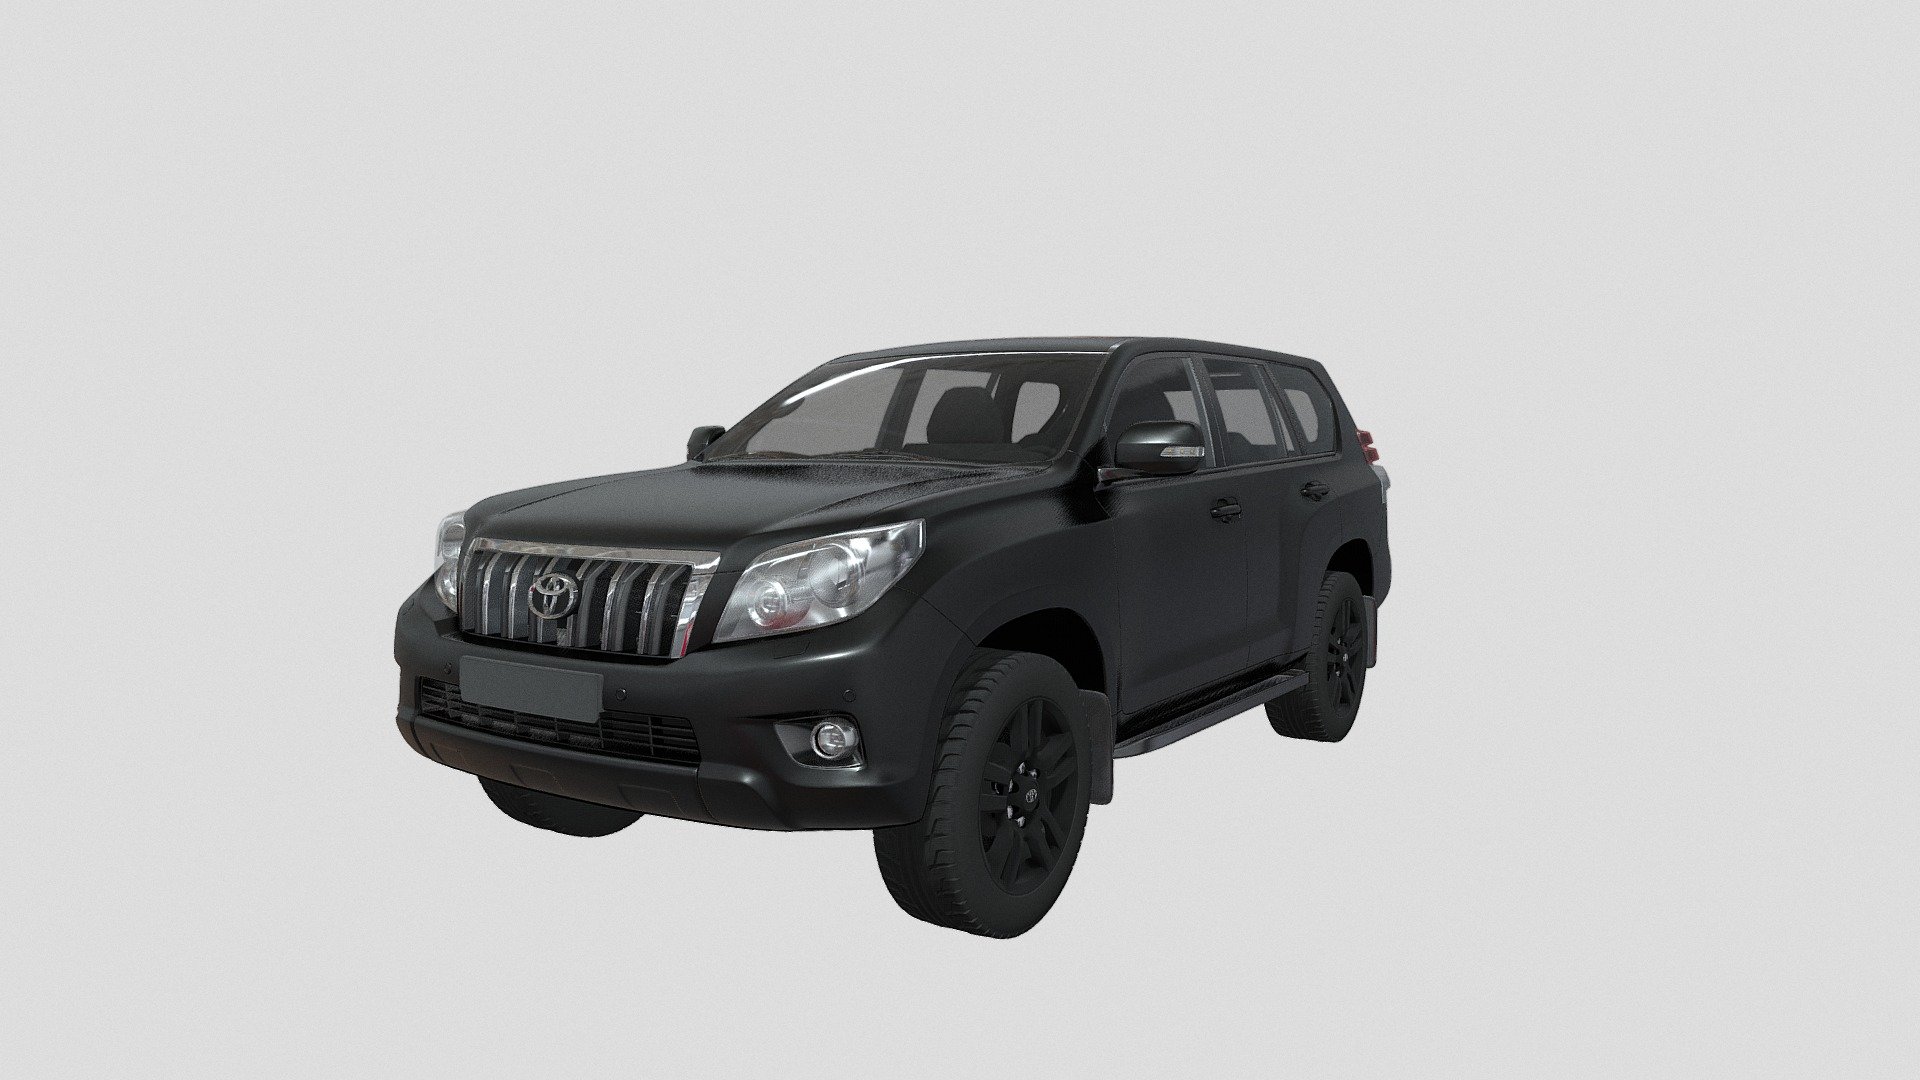 High resolution,realistic, fully detailed and textured exterior of a car - Tayota Prado 2010 Car Rigged .
Modeled in Blender

If you like this model I would appreciate if you rate it.
Also check out my other models, just click on my user name to see complete - Tayota Prado 2010 3D Model - Download Free 3D model by Betier Models (@betier) 3d model